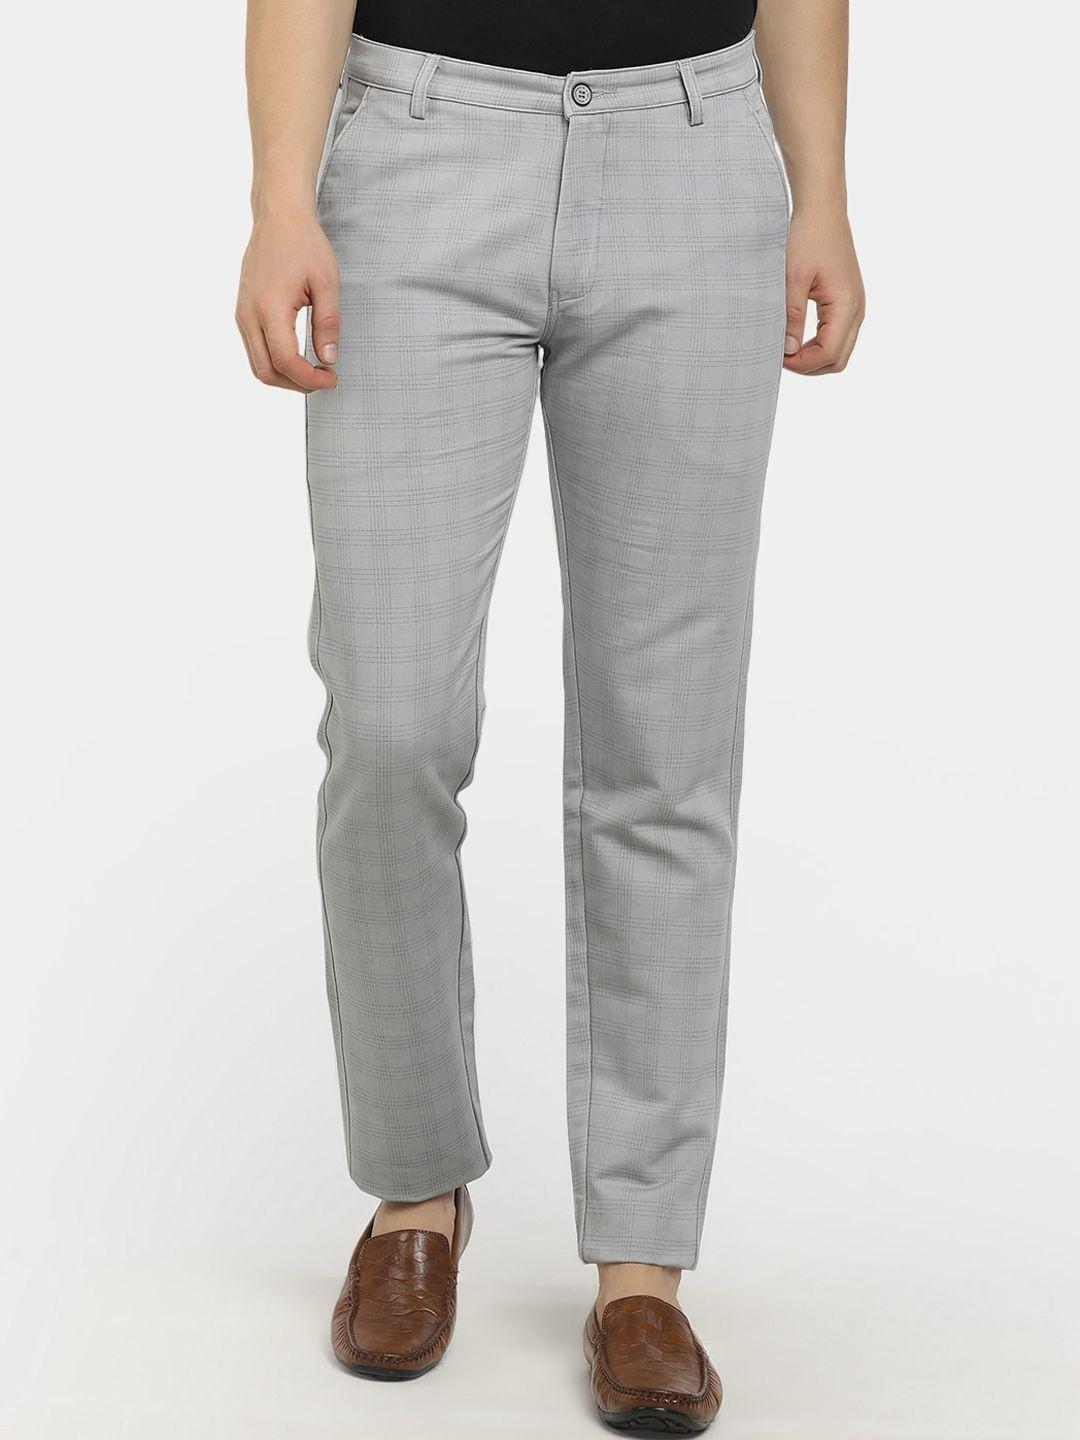 v-mart men grey checked classic slim fit cotton trousers